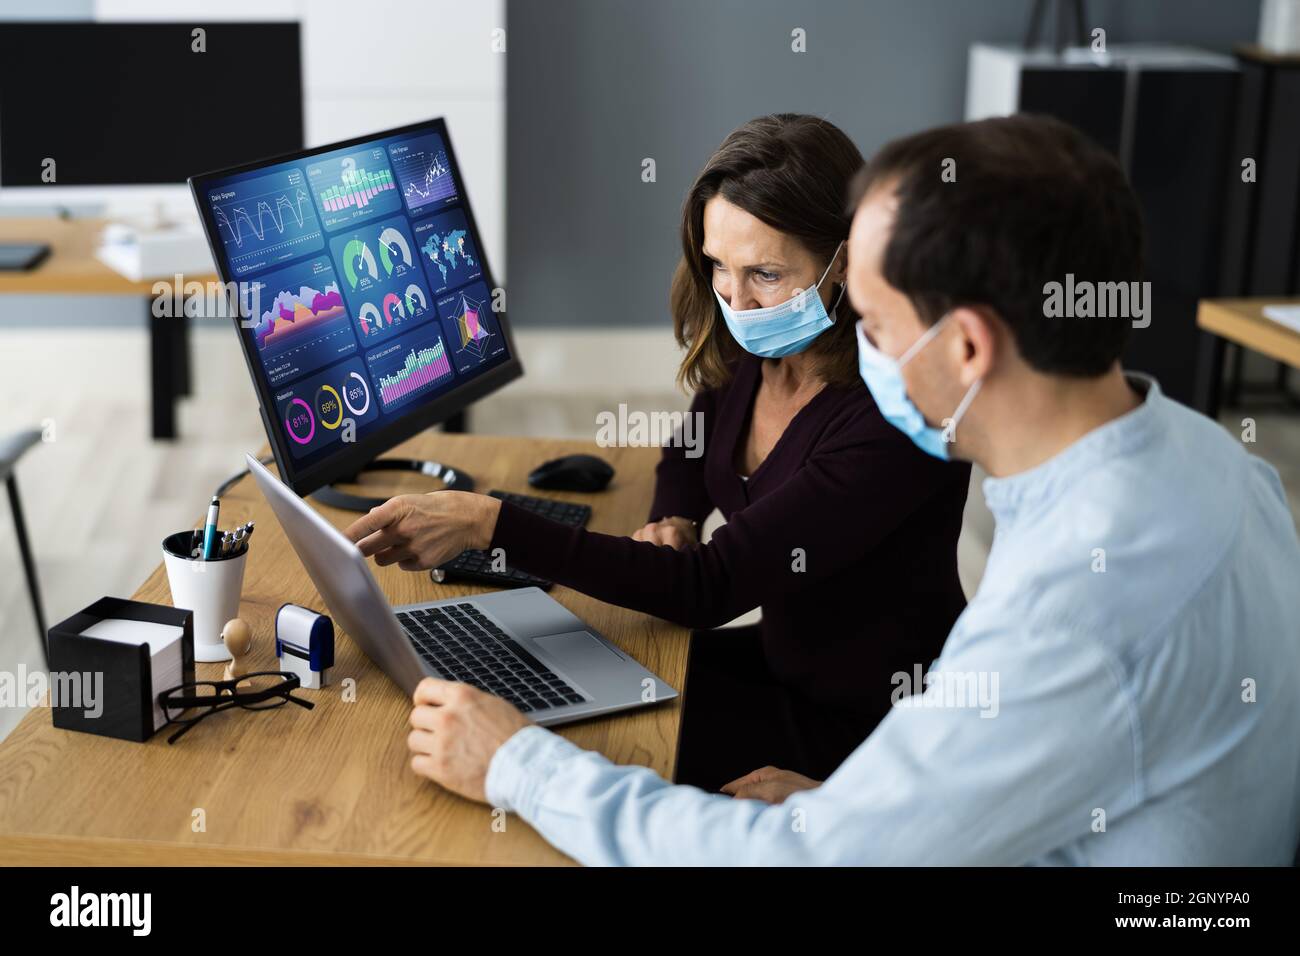 Manager Training Business People At Computer In Face Mask Stock Photo